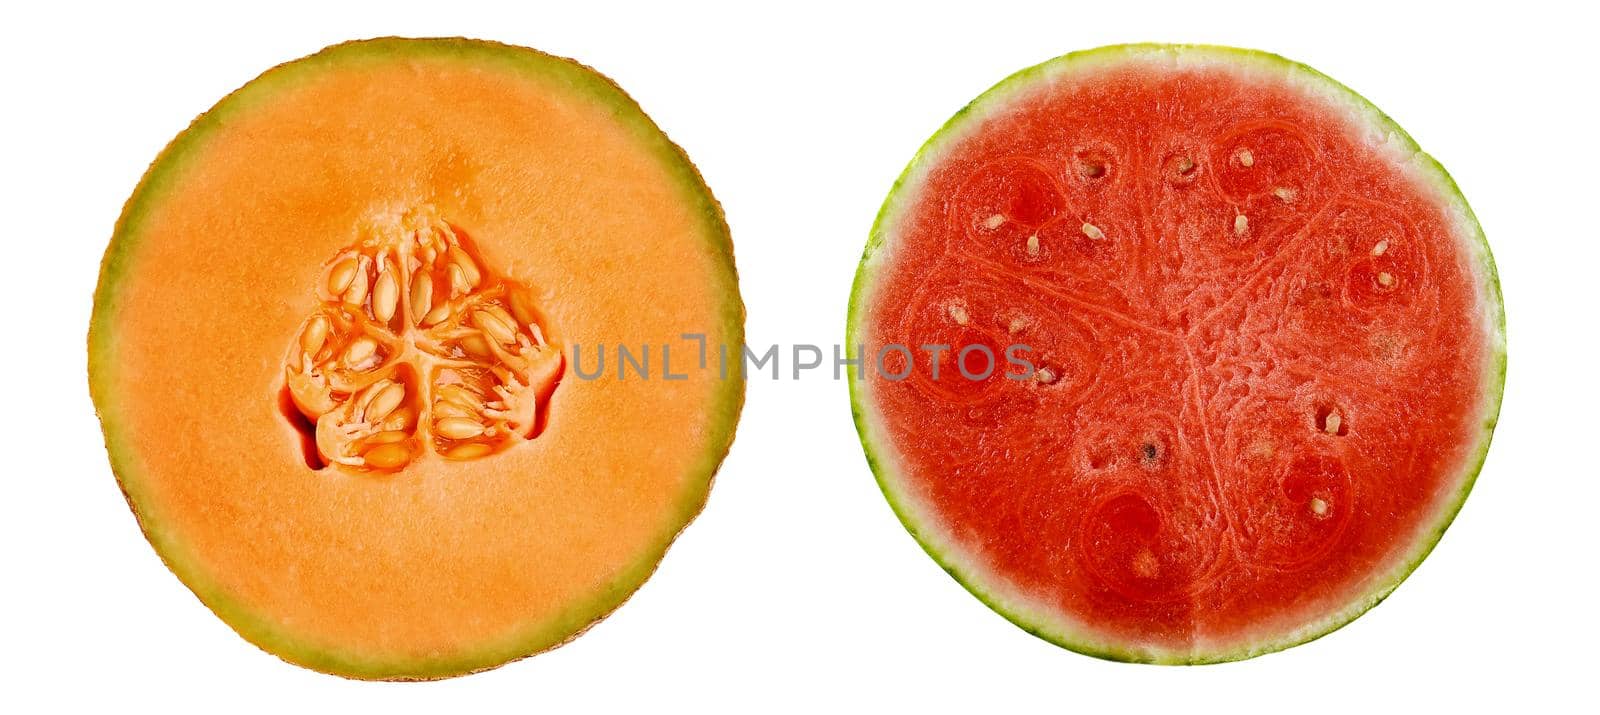 A half Cantaloupe Melon and a half Watermelon isolated oon white. by sCukrov